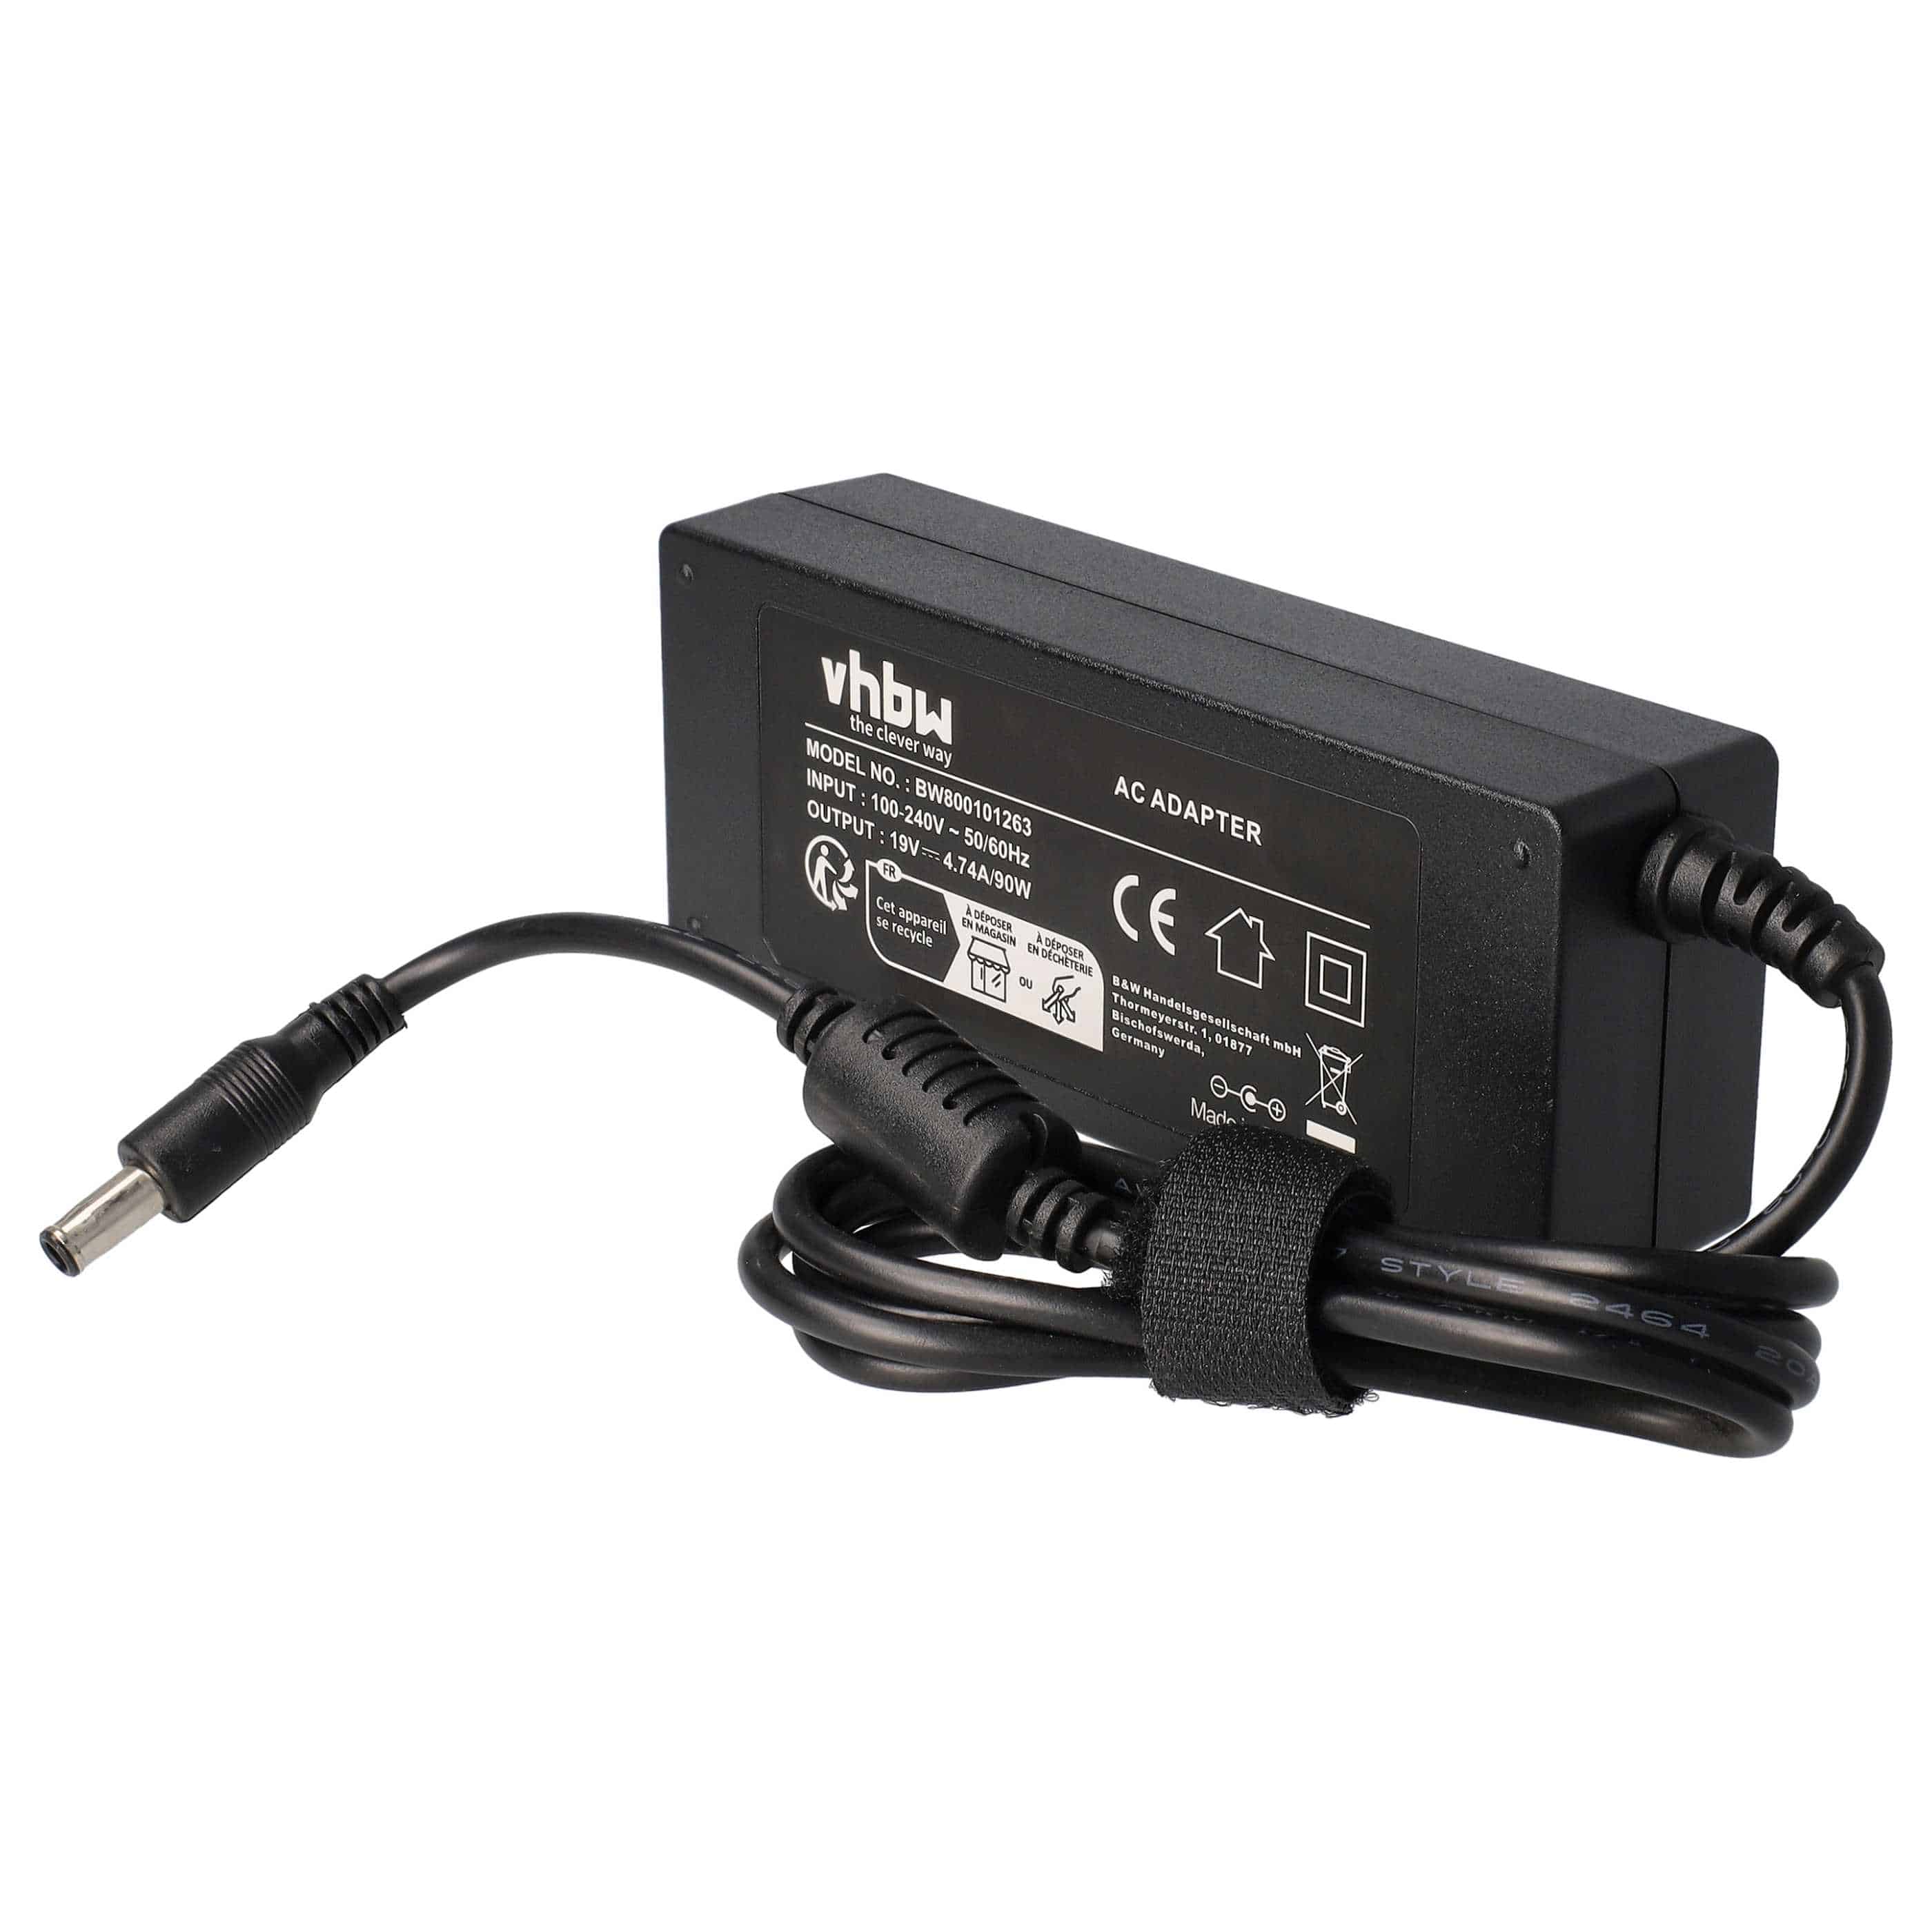 Mains Power Adapter replaces Samsung AD-8019, AA-PA1N90W, AD-9019A, AD-9019 for SamsungNotebook, 90 W